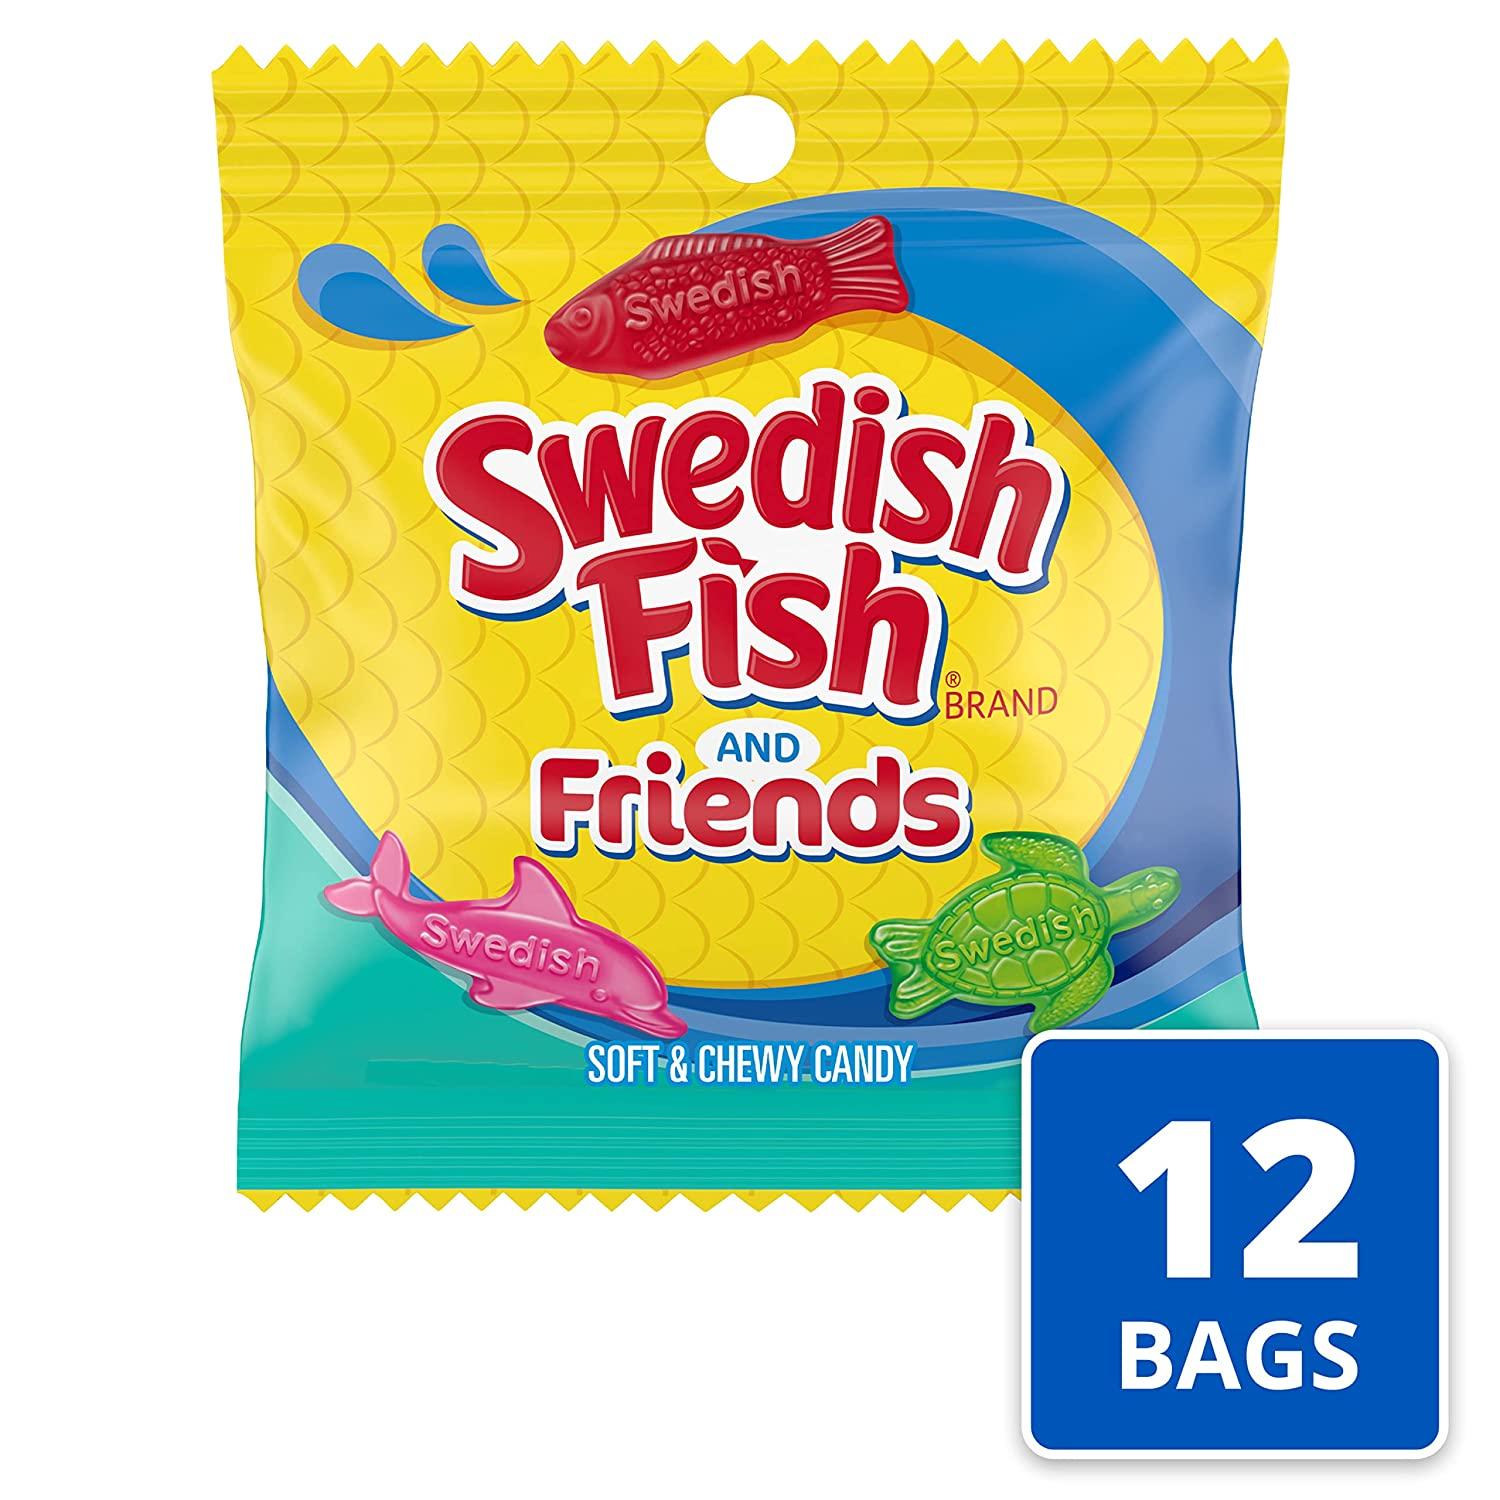 SWEDISH FISH and Friends Soft & Chewy Candy, 3.59 Ounce (Pack of